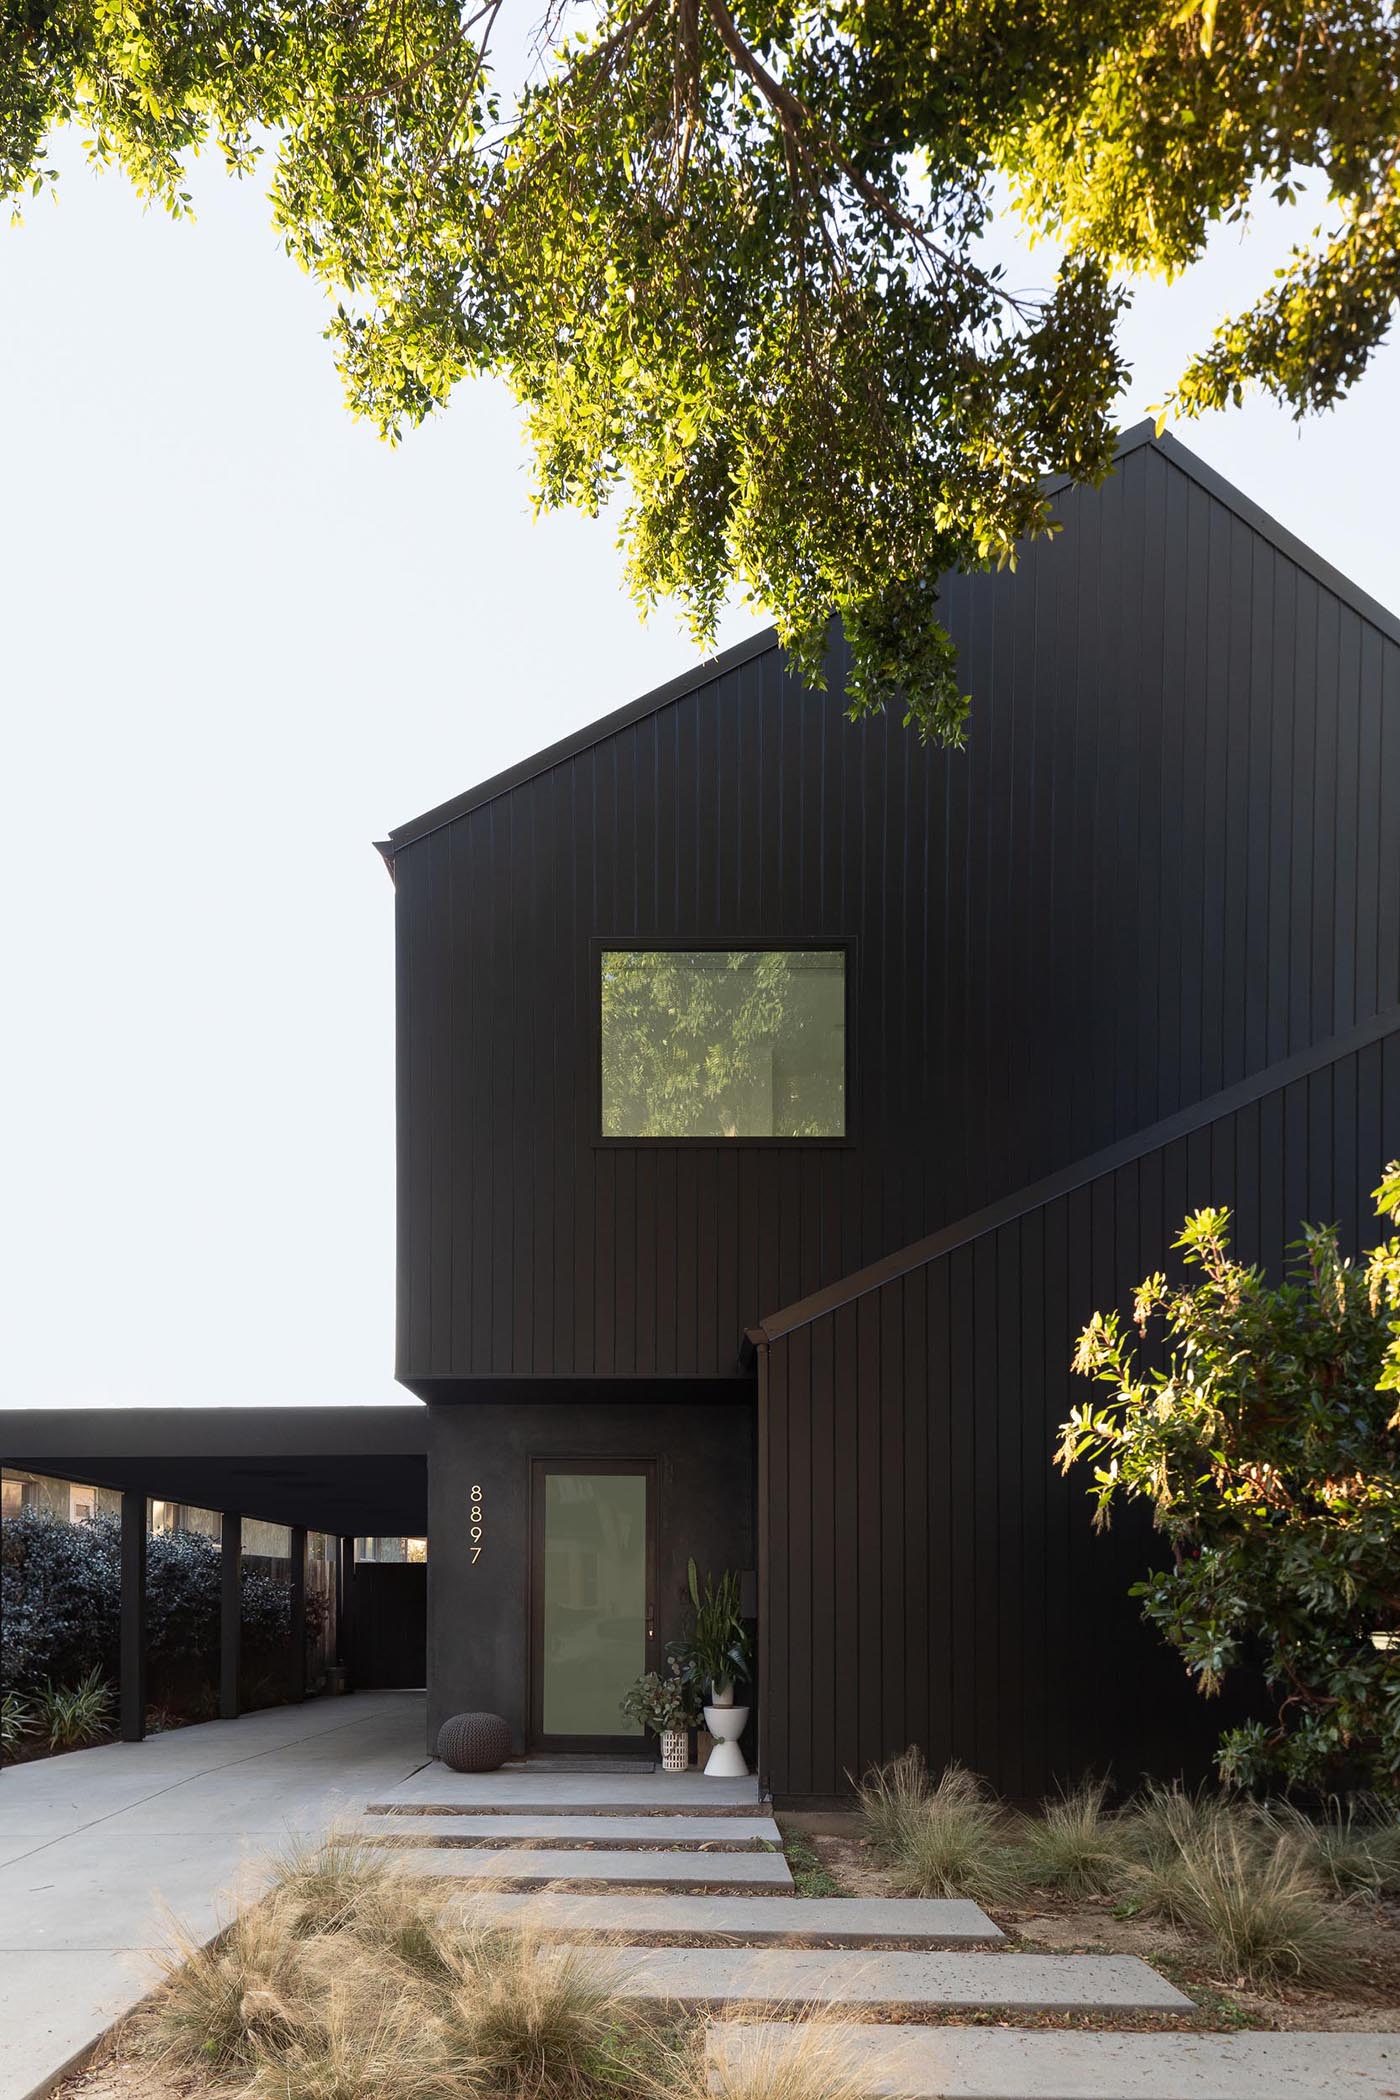 The dark and moody black exterior of this modern home was inspired by Japanese traditions like Shou Sugi Ban, while the design of the home evokes the familiar footprint of a traditional barn.